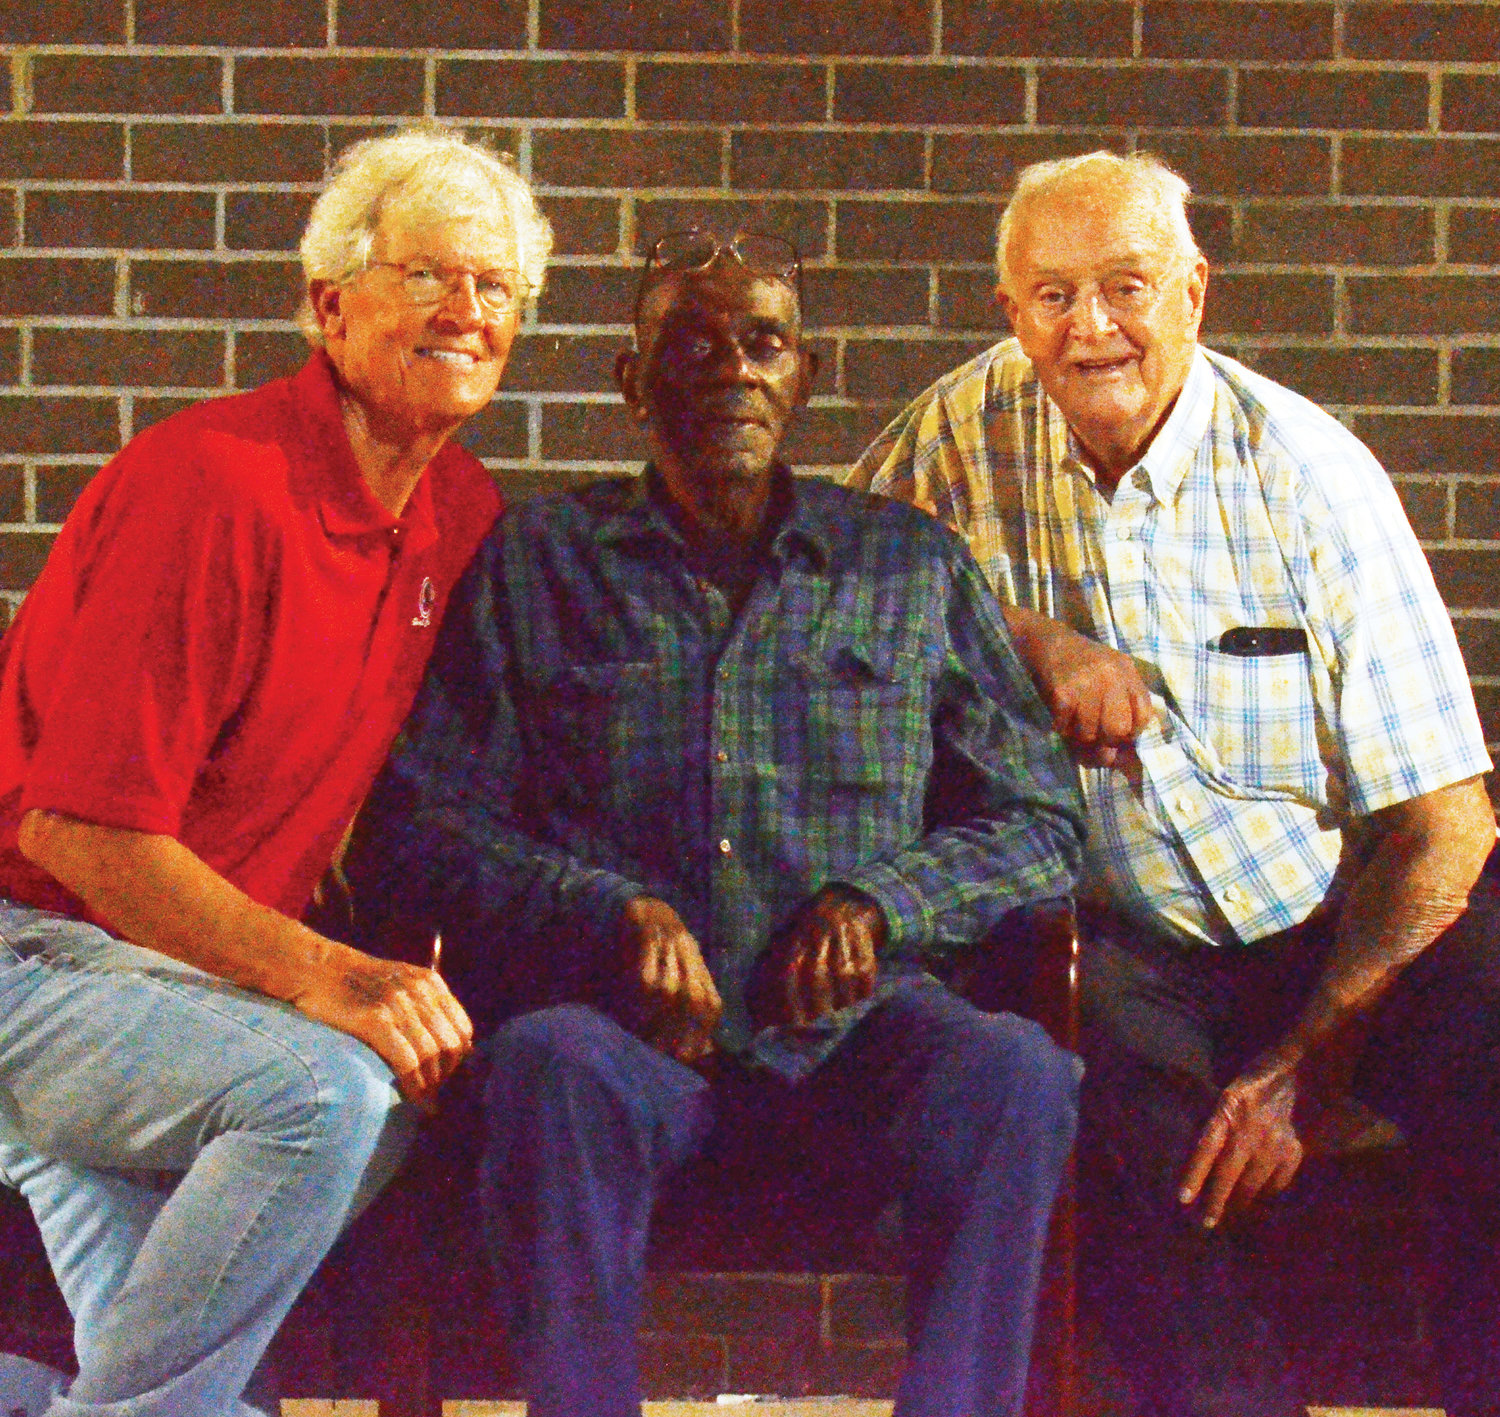 Graduates from the Purcell High School class of 1961, from left, Dr. Rick McCurdy, Herman Cheadle and Don Boyer visited at Conger Field Friday night among homecoming festivities and Cheadle’s induction into the Purcell Sports Hall of Fame.